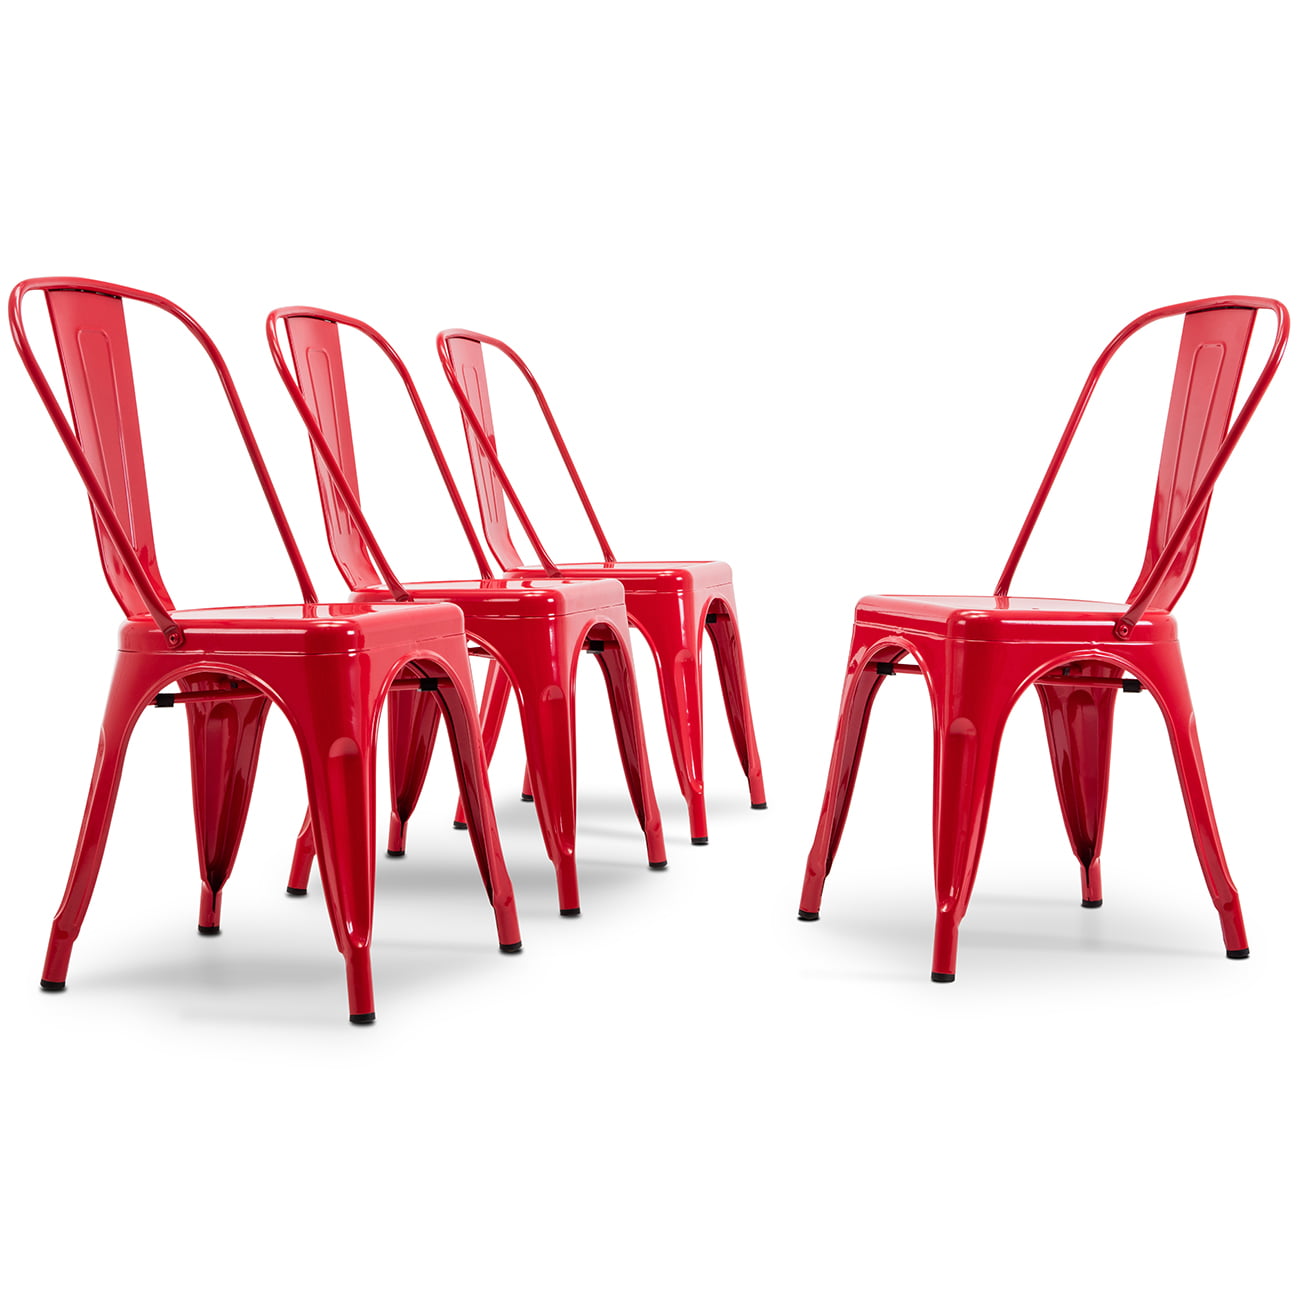 CASSANDRA RED NEW SET OF 2 STEEL STACKABLE DINING CHAIR-RETRO TOLIX-STYLE SEAT 